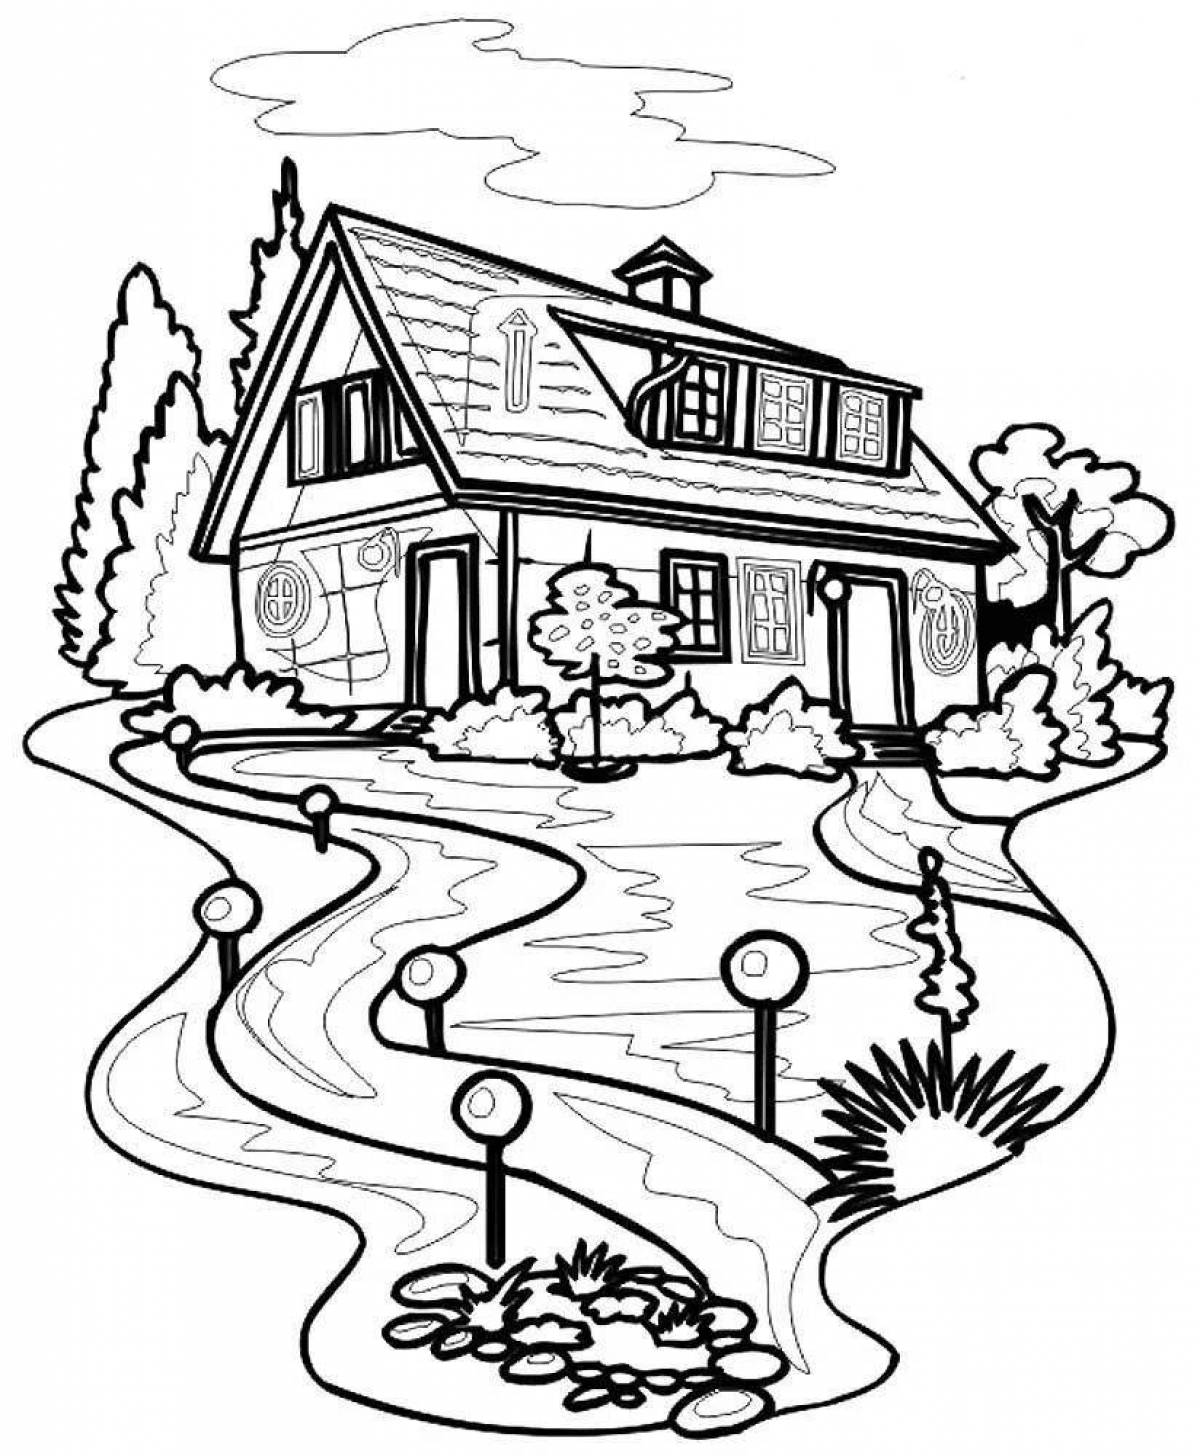 Coloring page beautiful country house